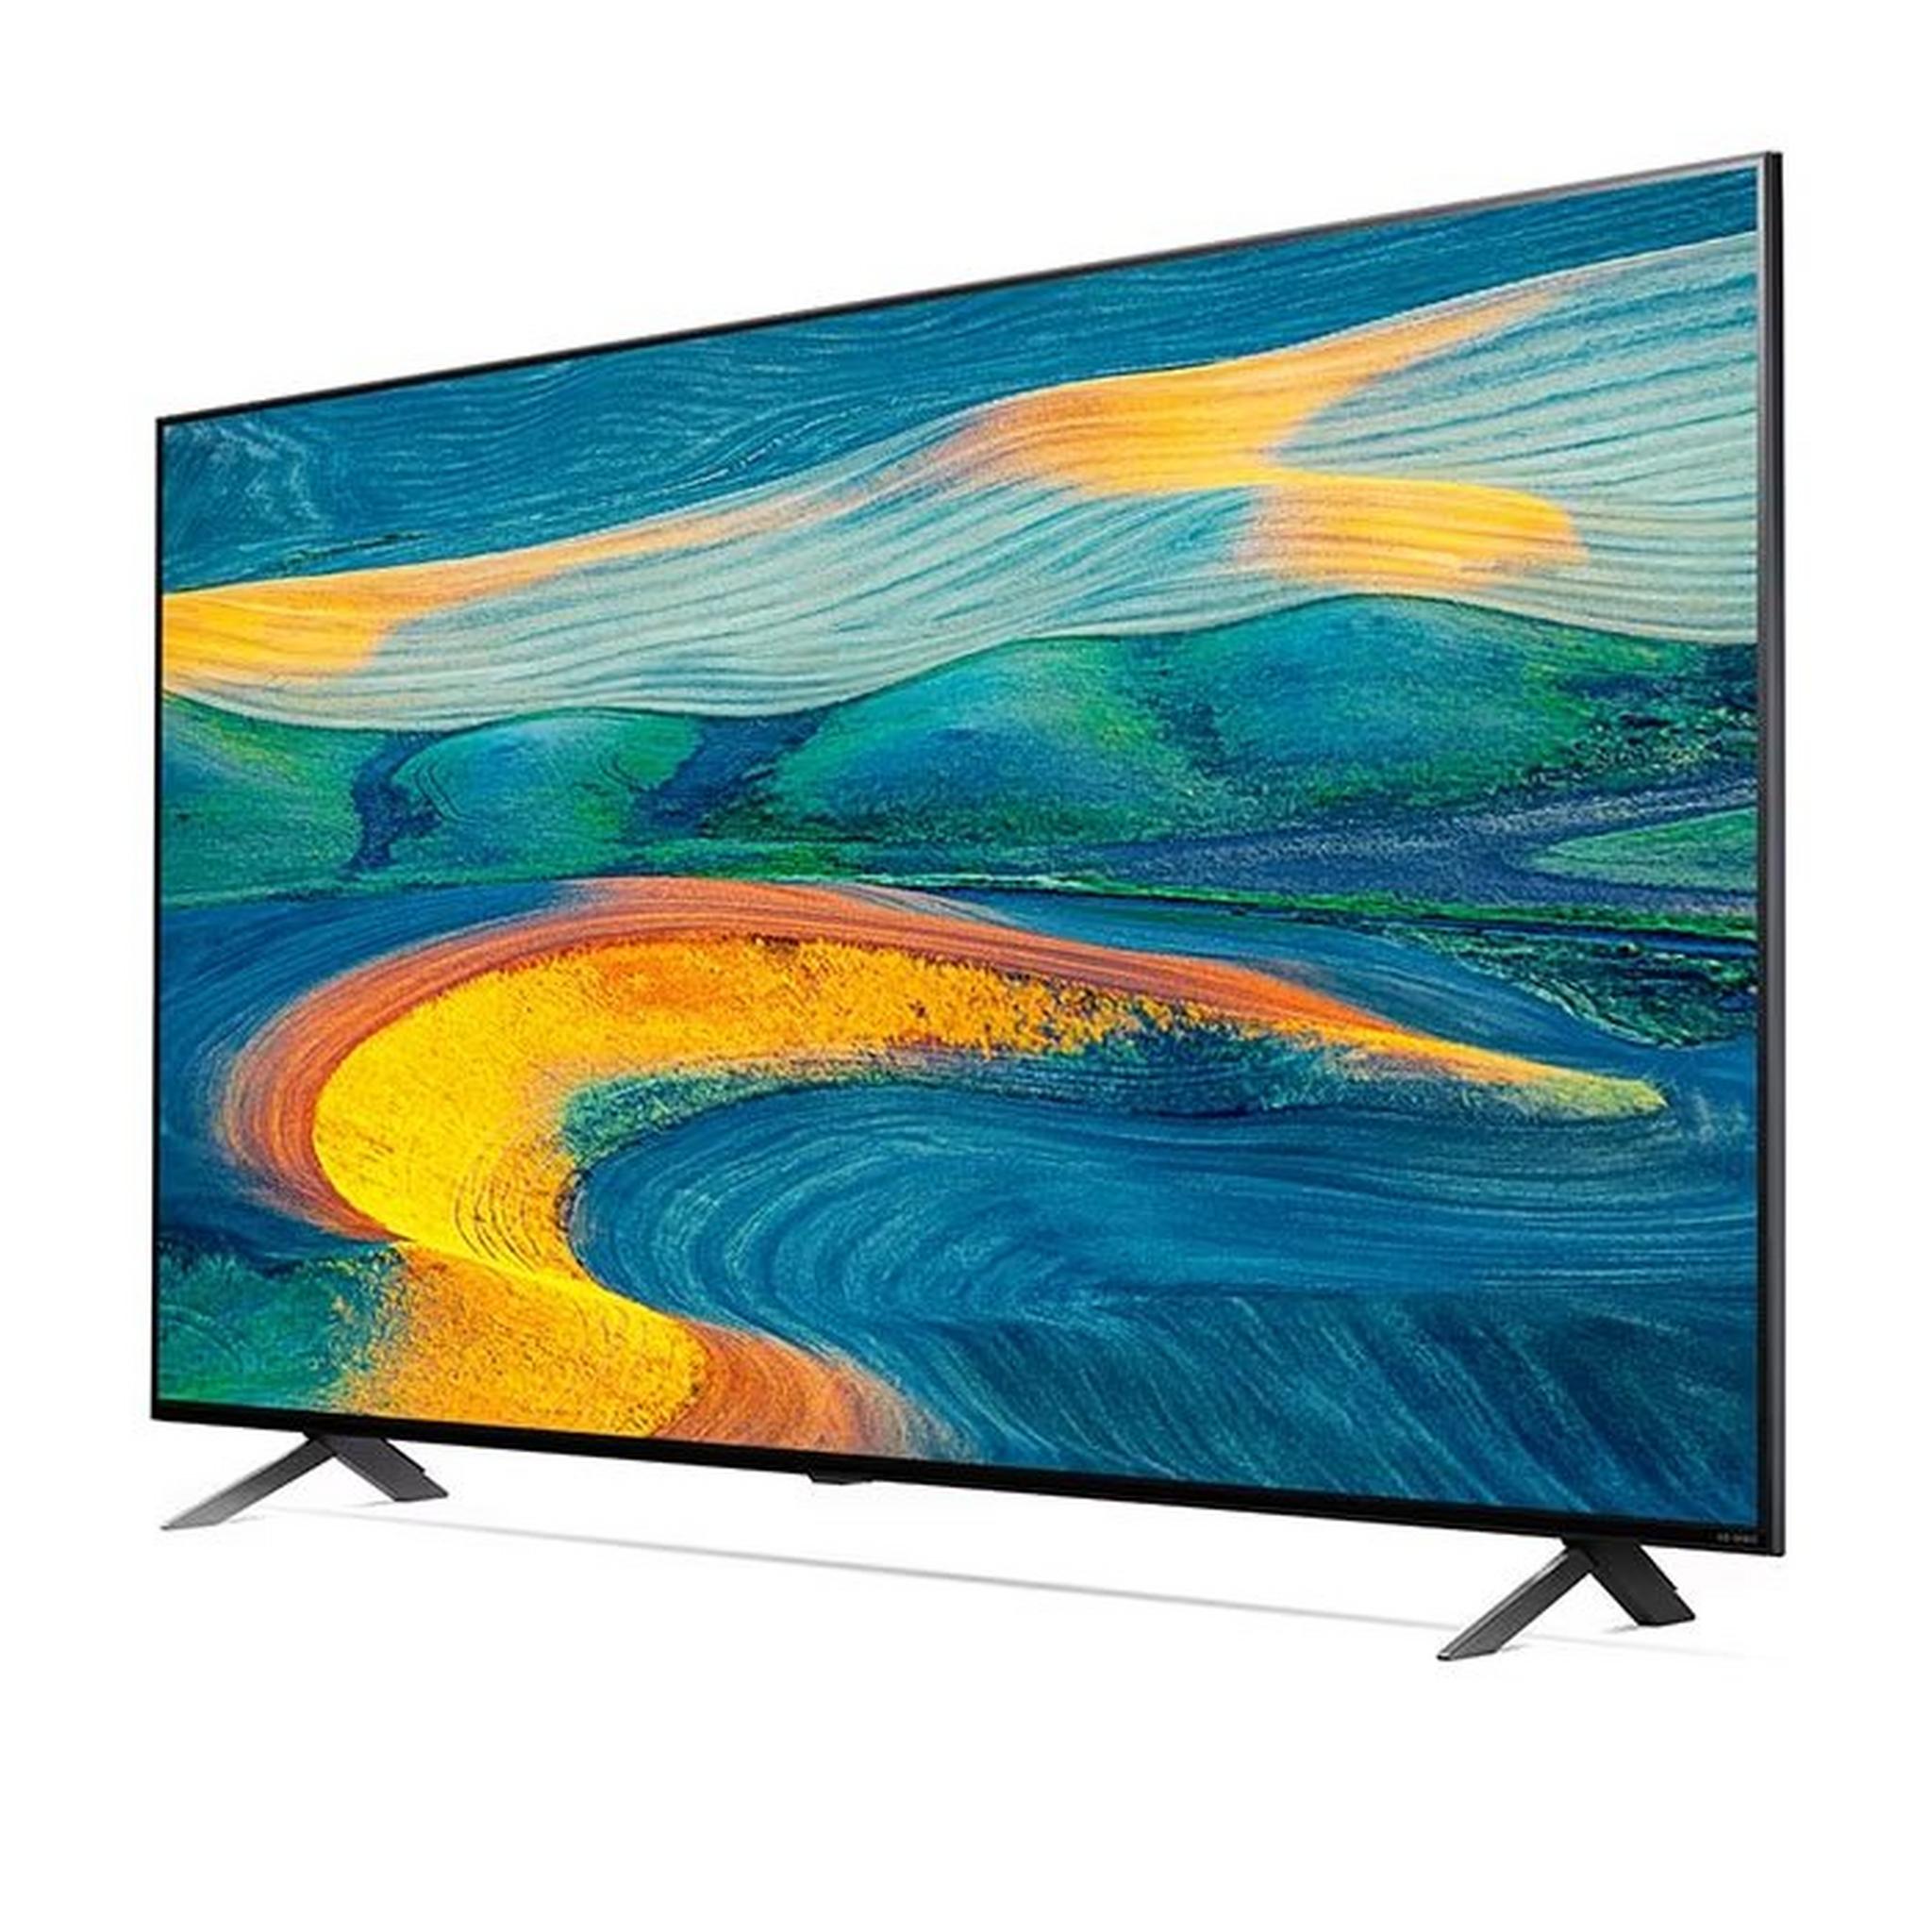 LG 65 -inch QNED7S Series Real 4K UHD Smart LED TV 65QNED7S6 - Black